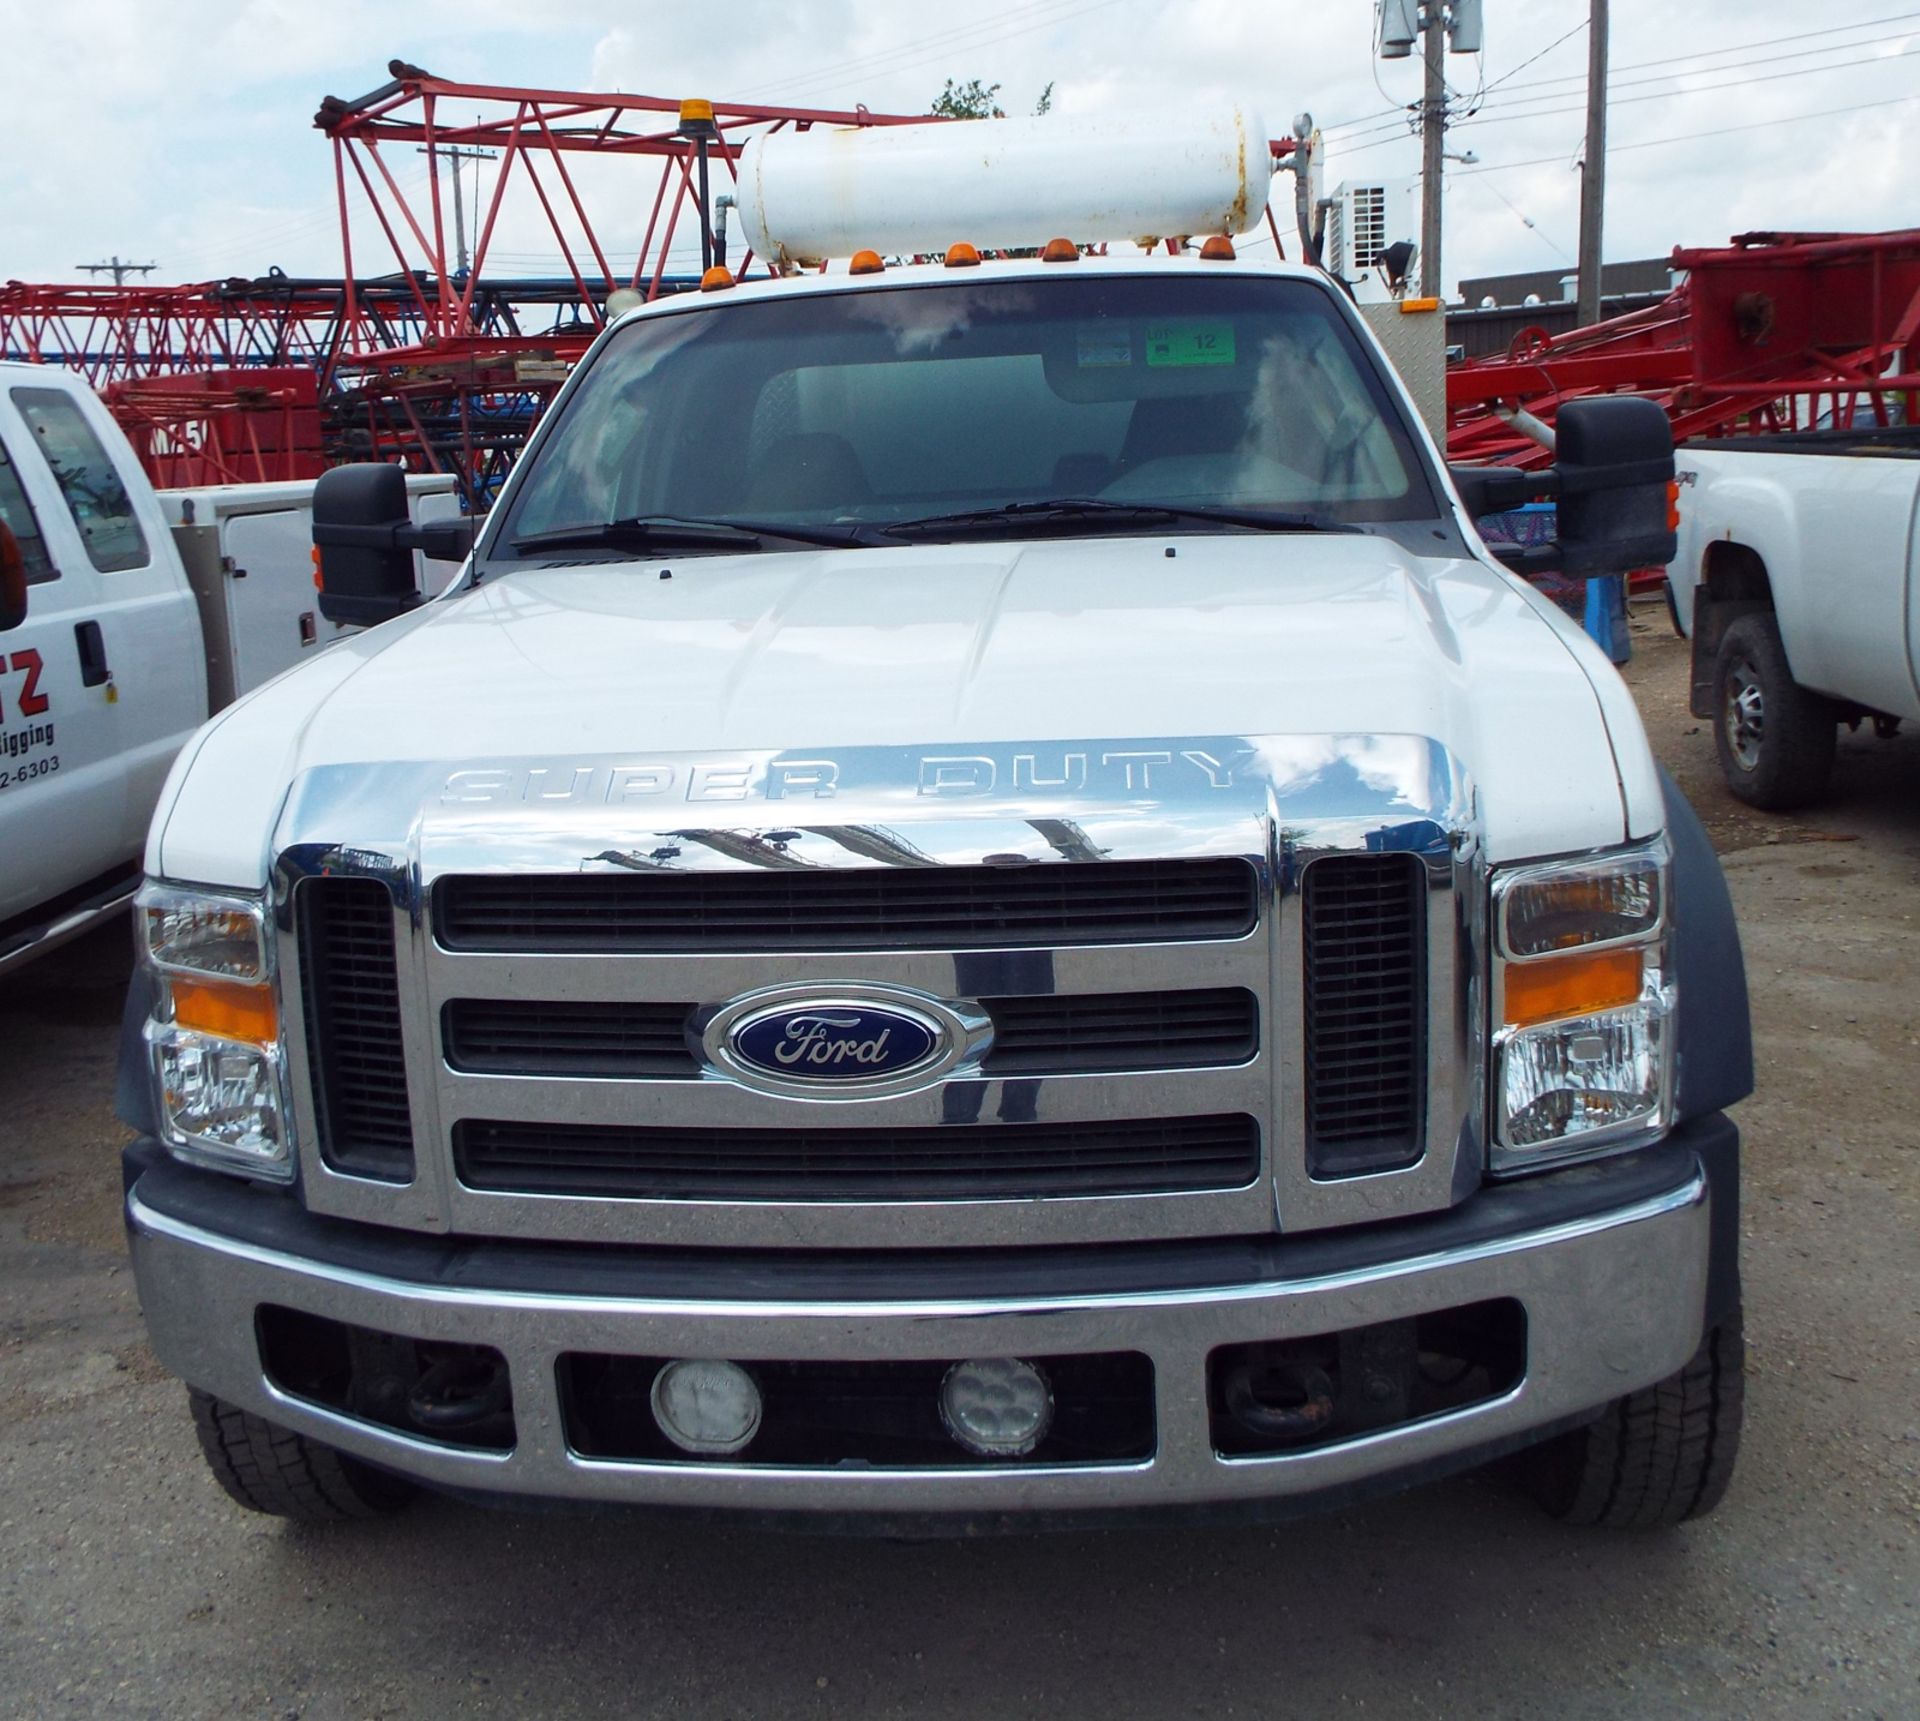 FORD (2008) F450 XLT SUPER DUTY EXTENDED CAB SERVICE TRUCK, V8 POWERSTROKE DIESEL ENGINE,